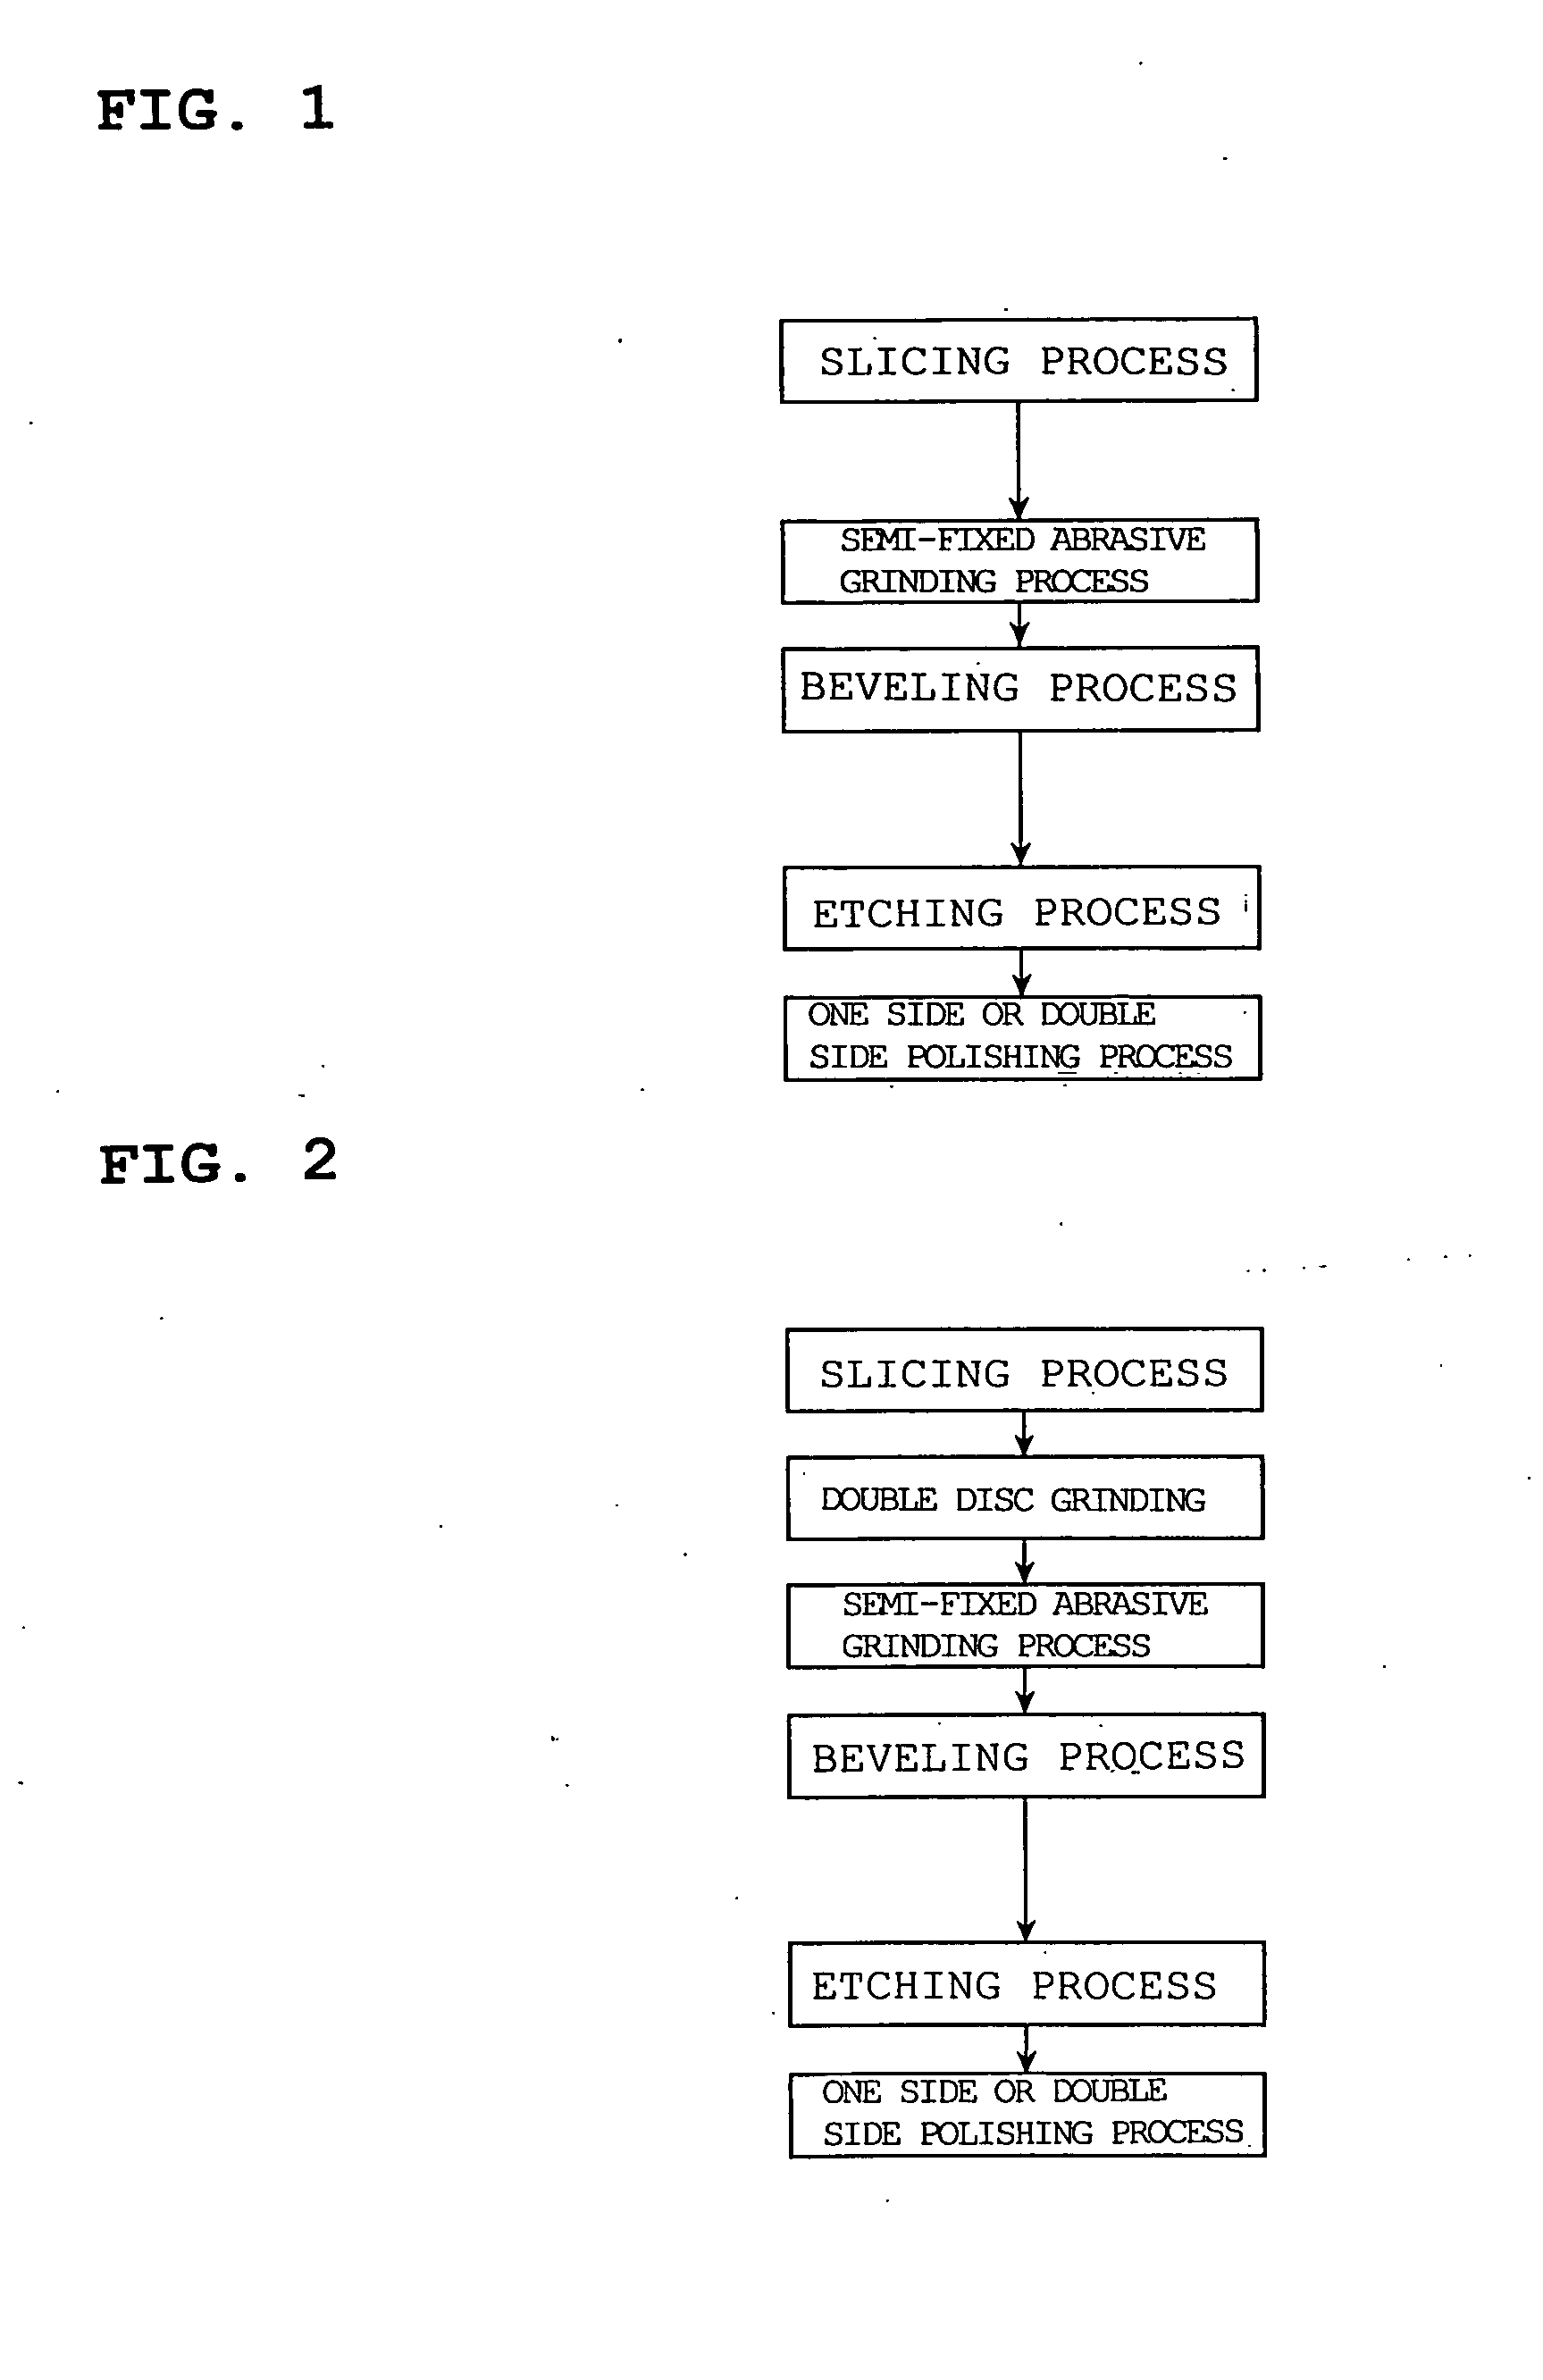 Production method for semiconductor wafer